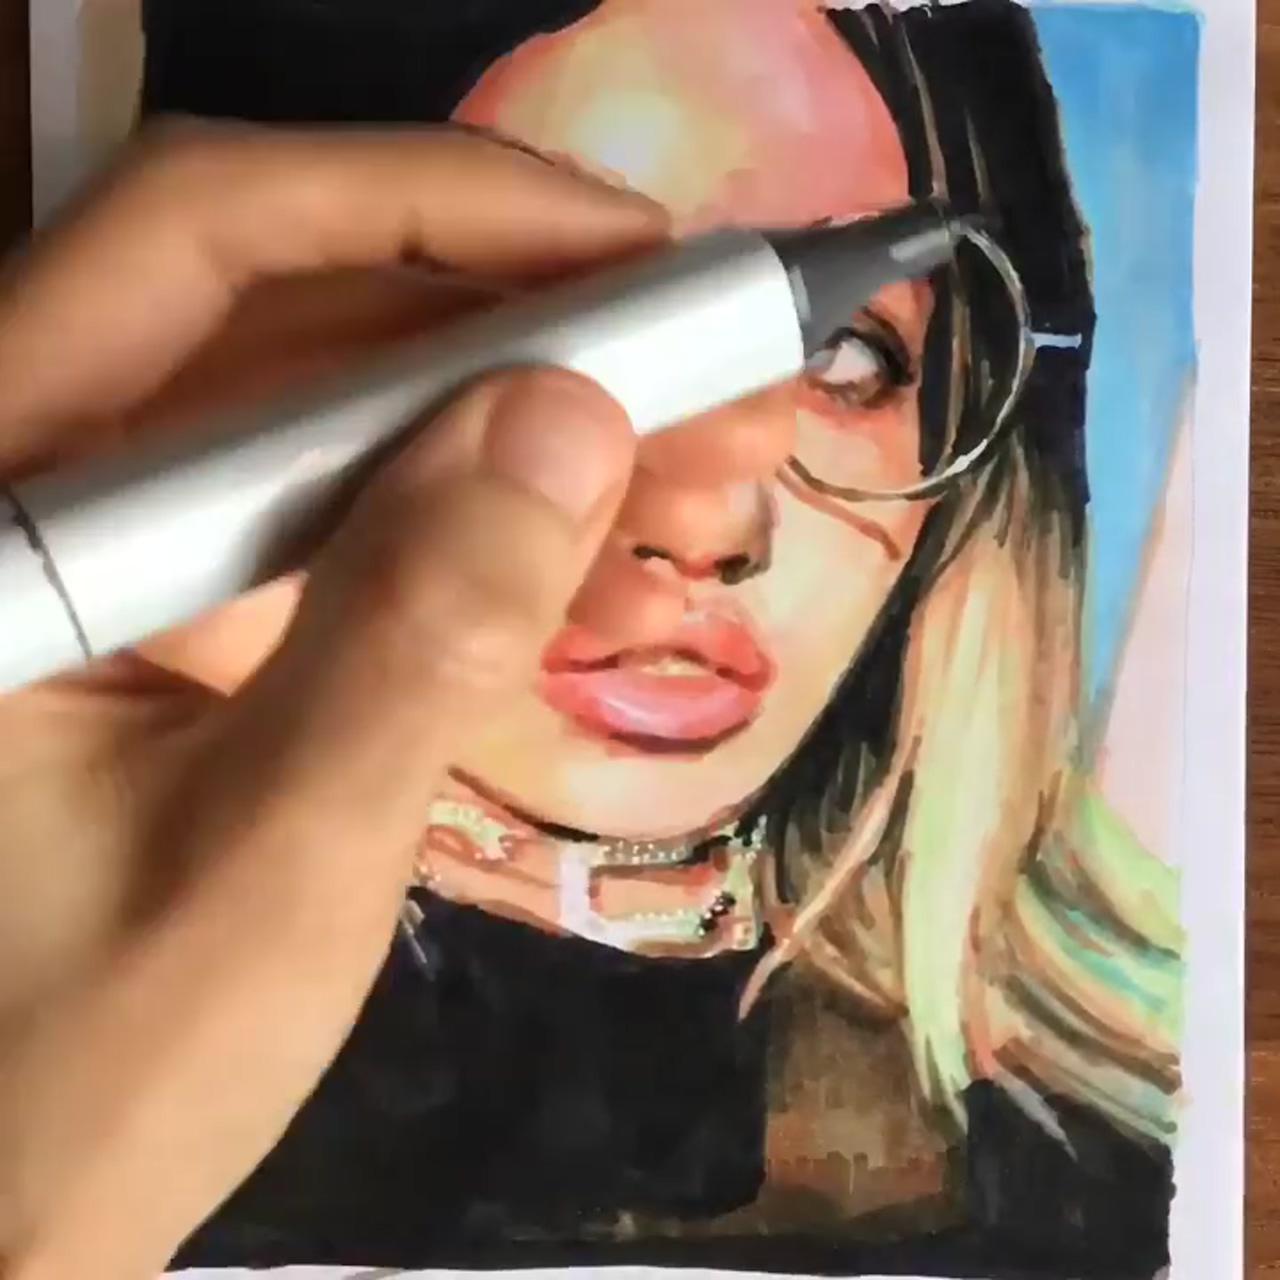 "copic drawing: where every stroke comes to life" | copic drawings